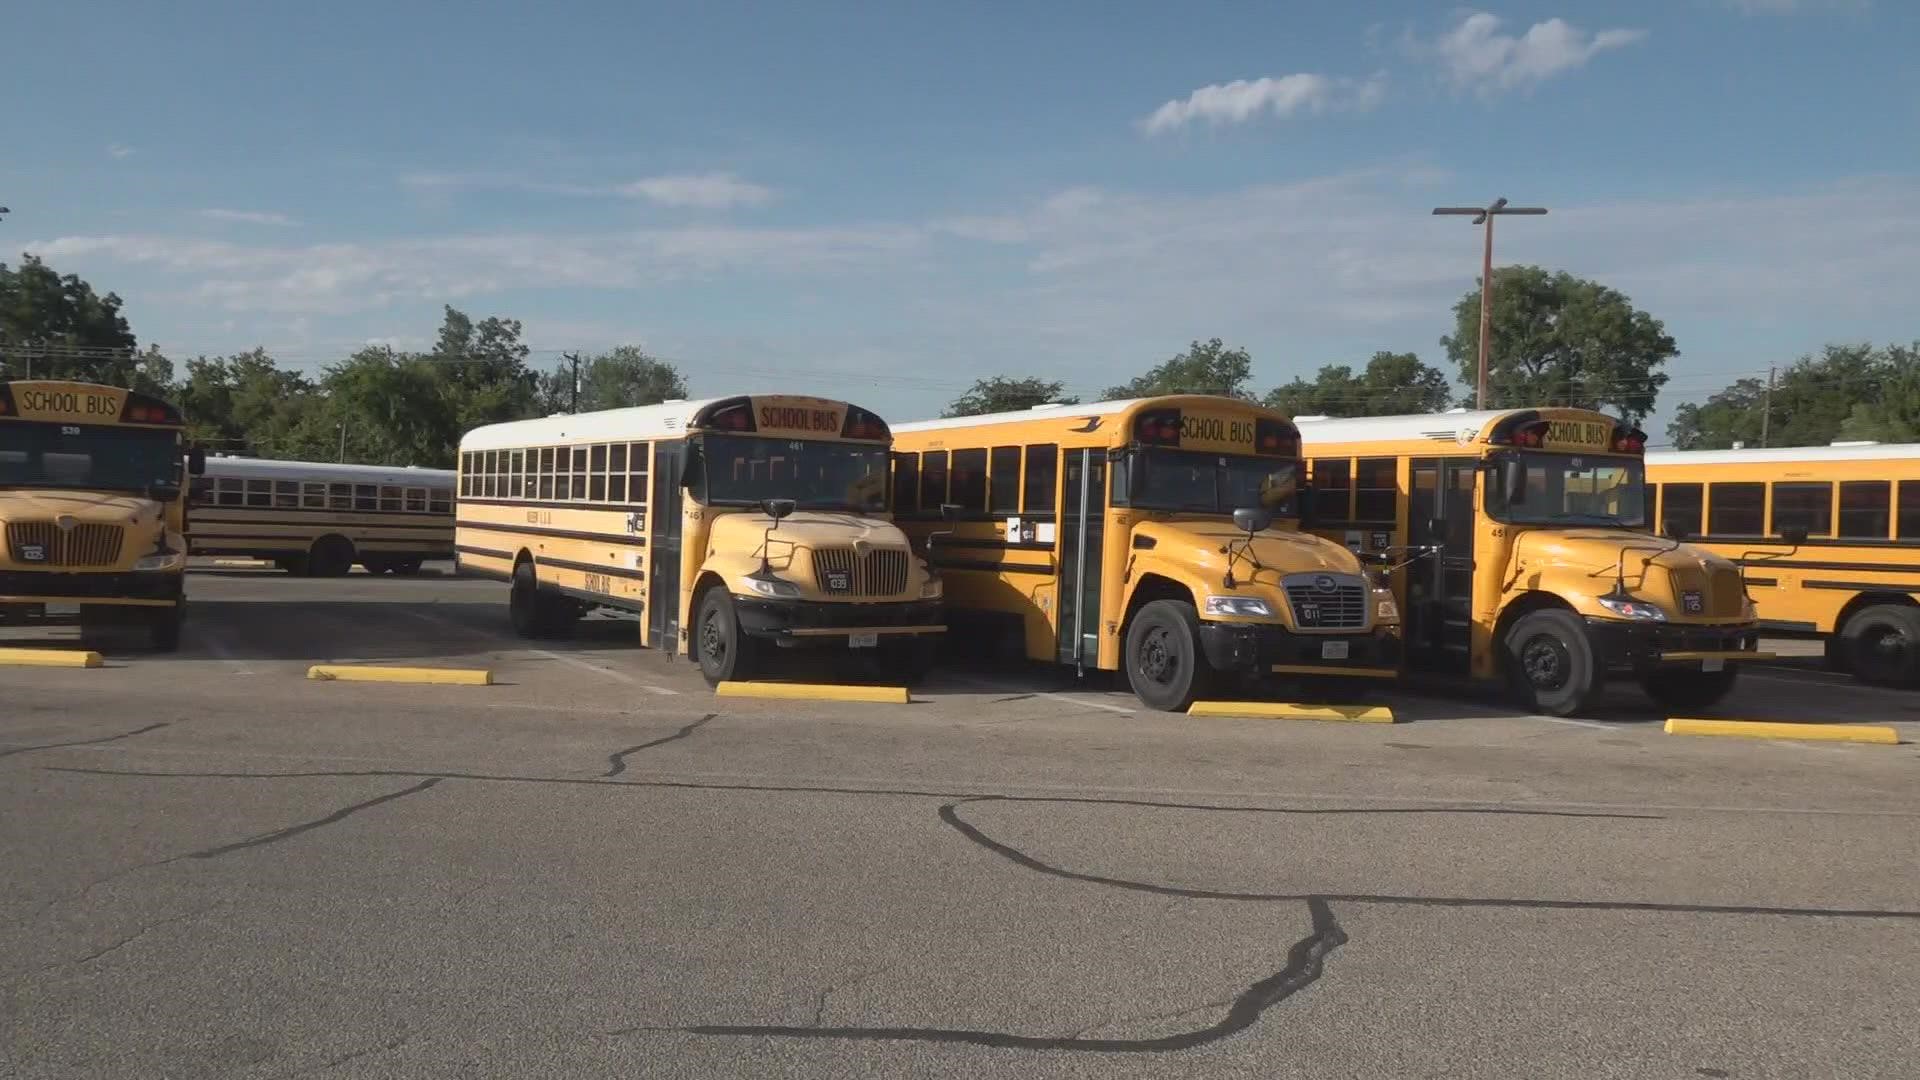 "This new program will enhance safety and security for all of our bus riders and drivers,” Assistant Superintendent of Facilities and Operations Kent Boyd said.